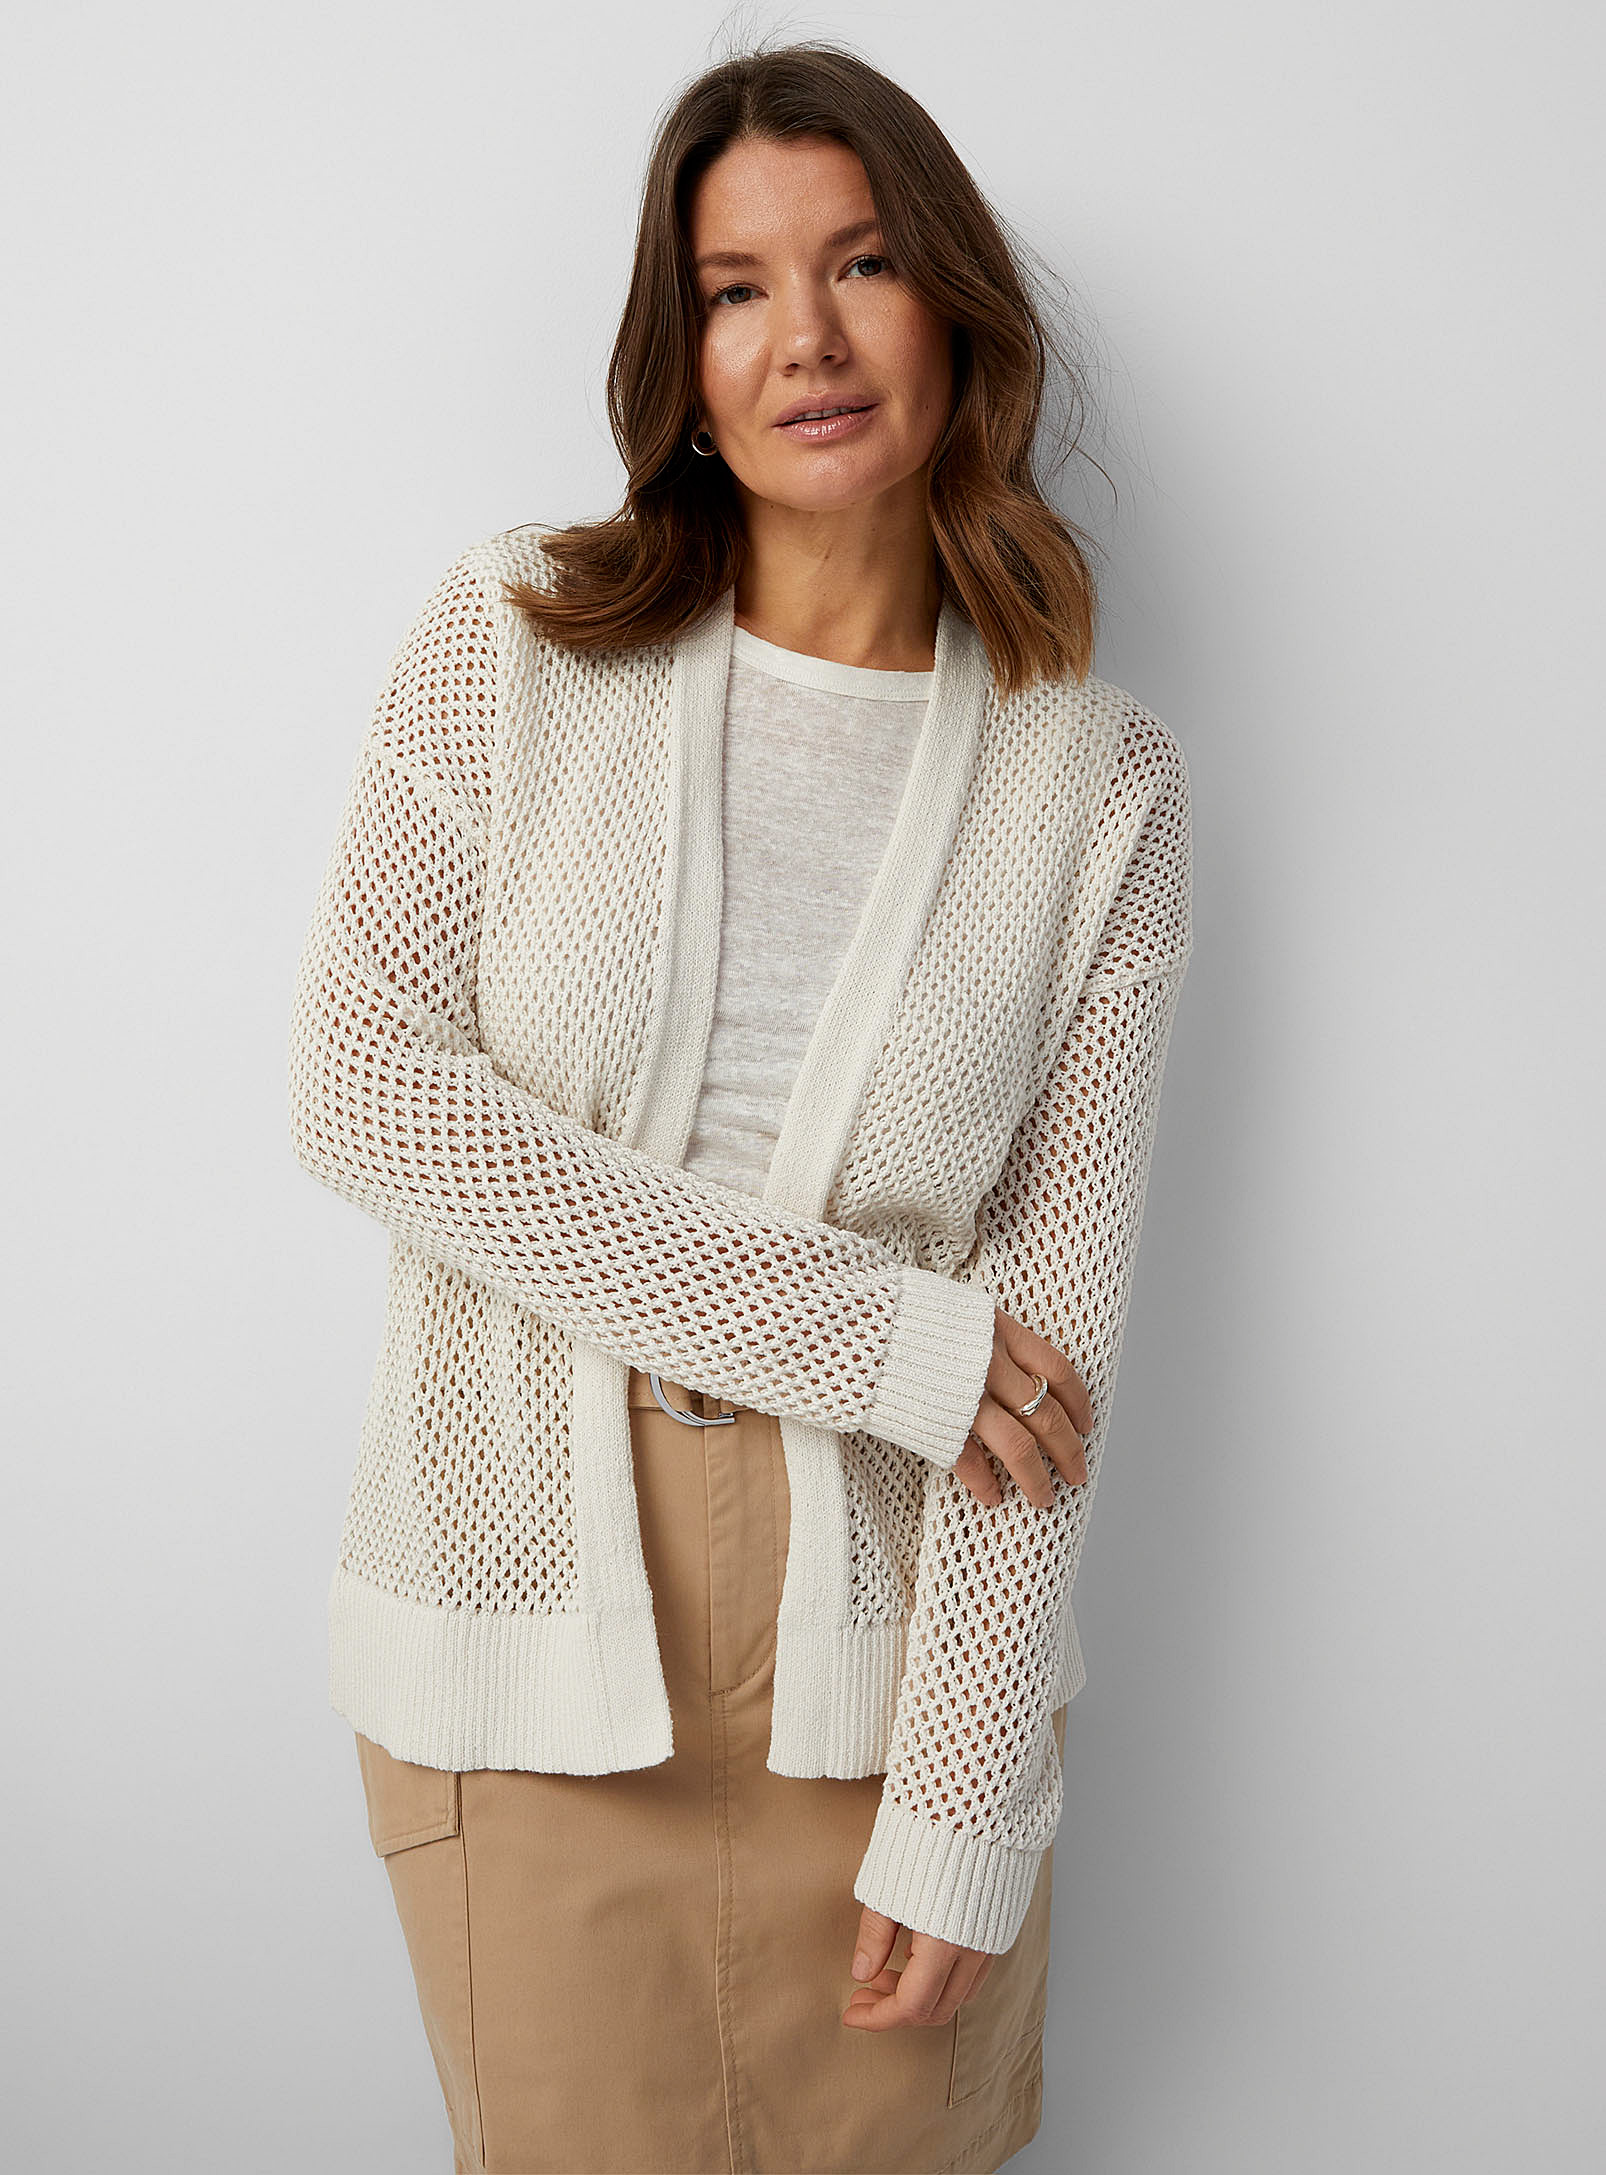 Contemporaine Mesh Weave Open Cardigan In Ivory White